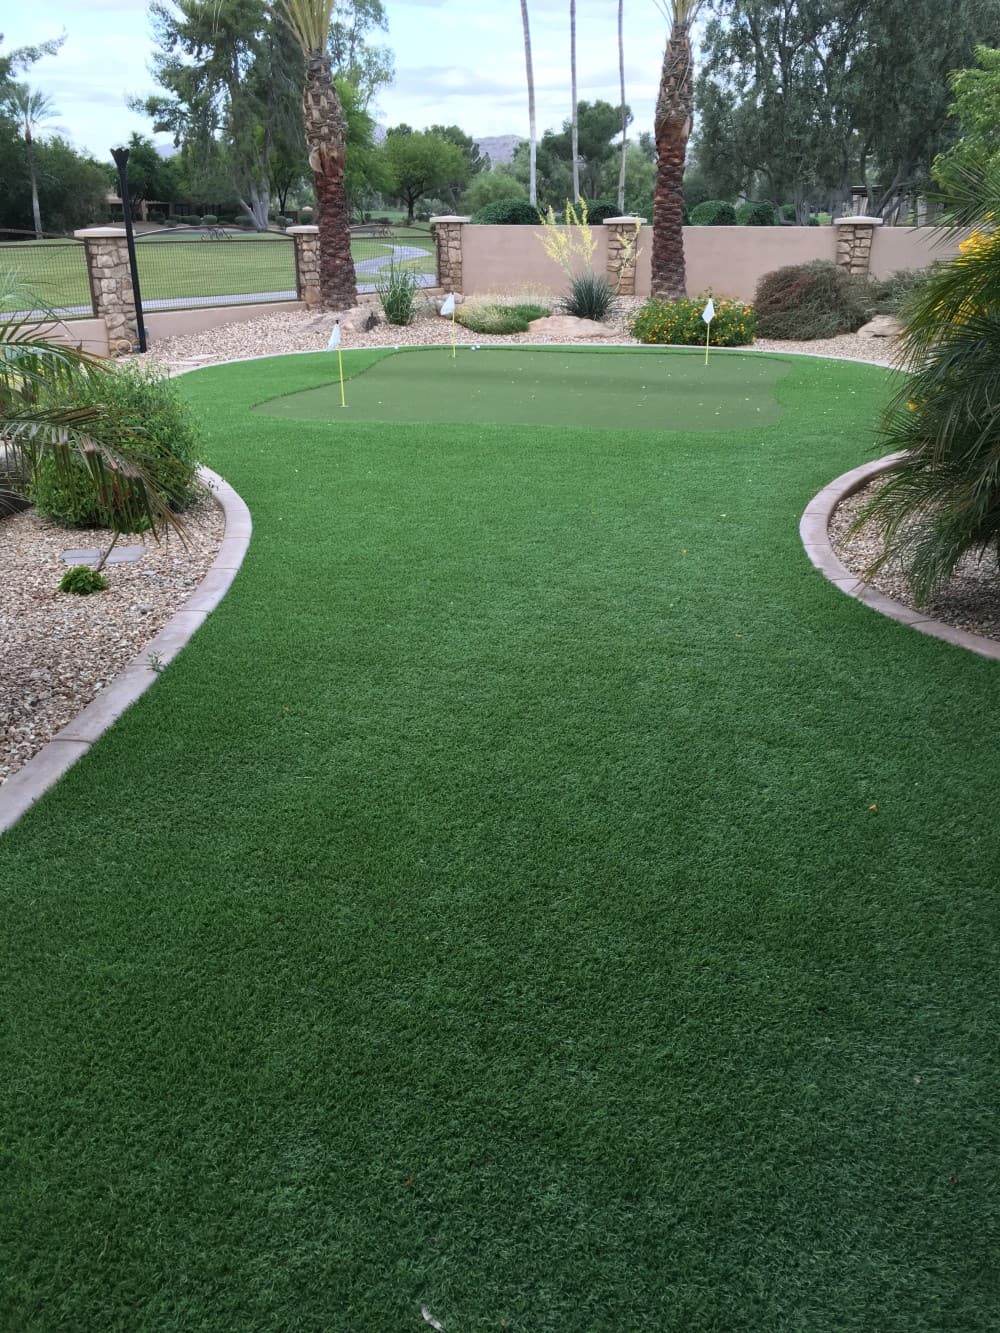 Paradise Greens becomes distributor of anti-microbial infill for AZ